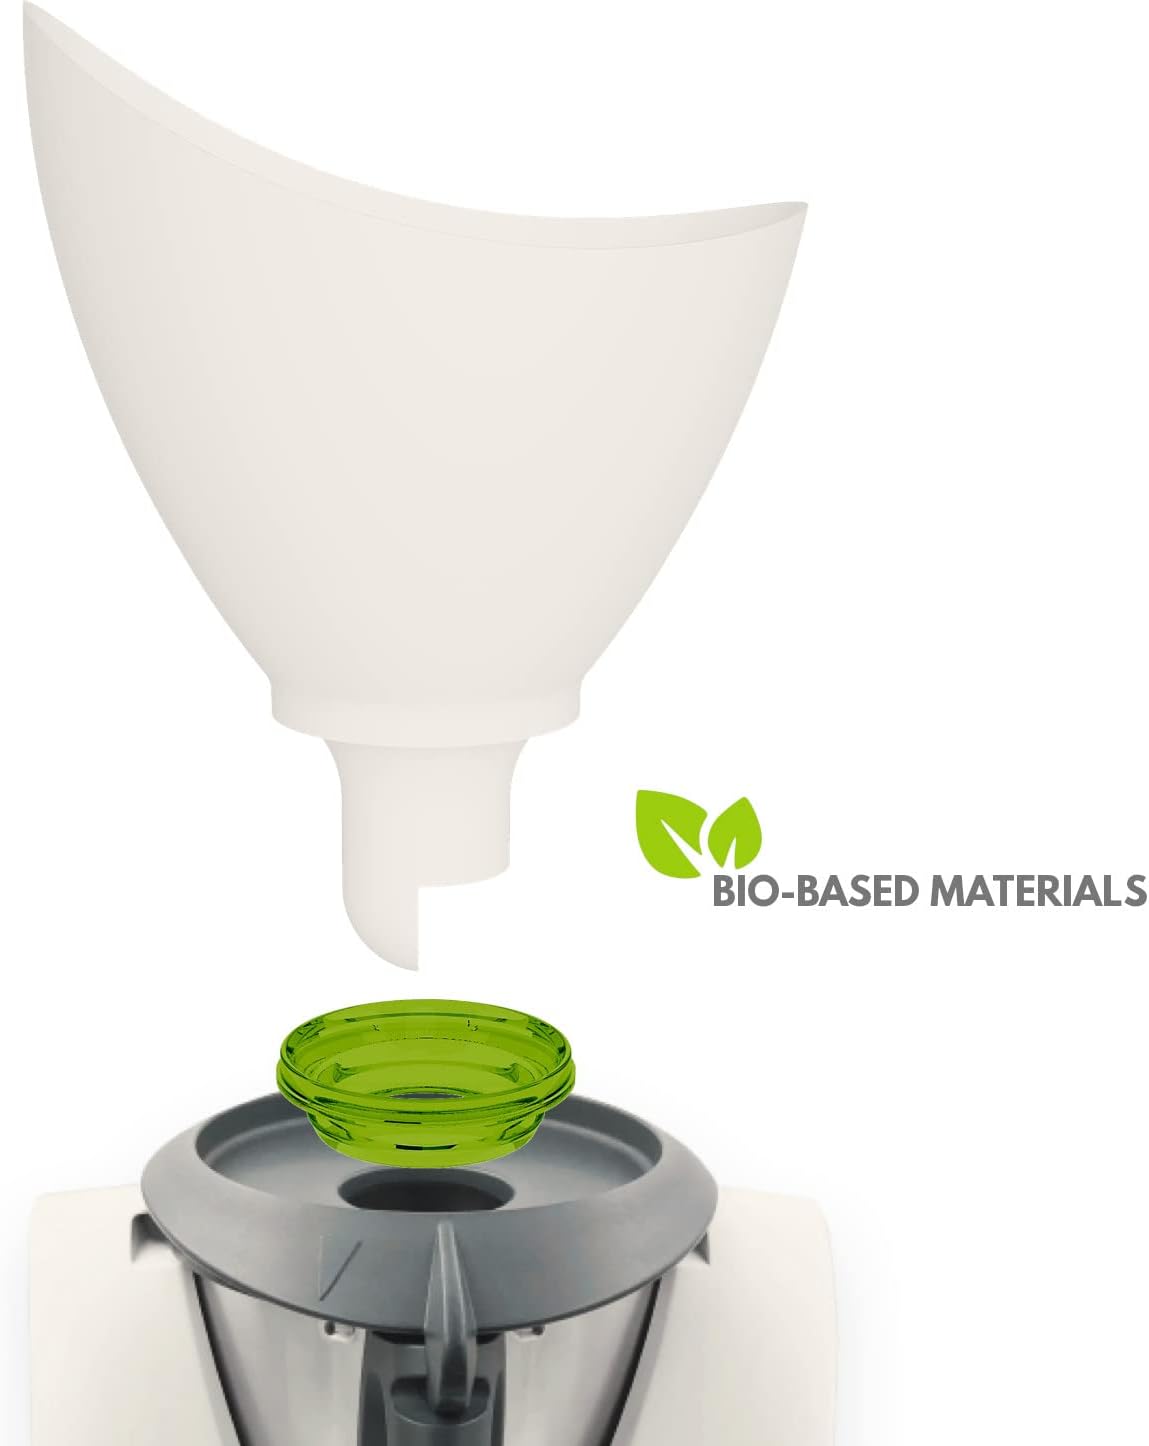 Madama Bimbuto - Funnel for Thermomix TM31, TM5 and TM6. Accessory for Thermomix Made of biomaterial for Food, Durable, Non-Toxic and BPA-Free. Made in Italy